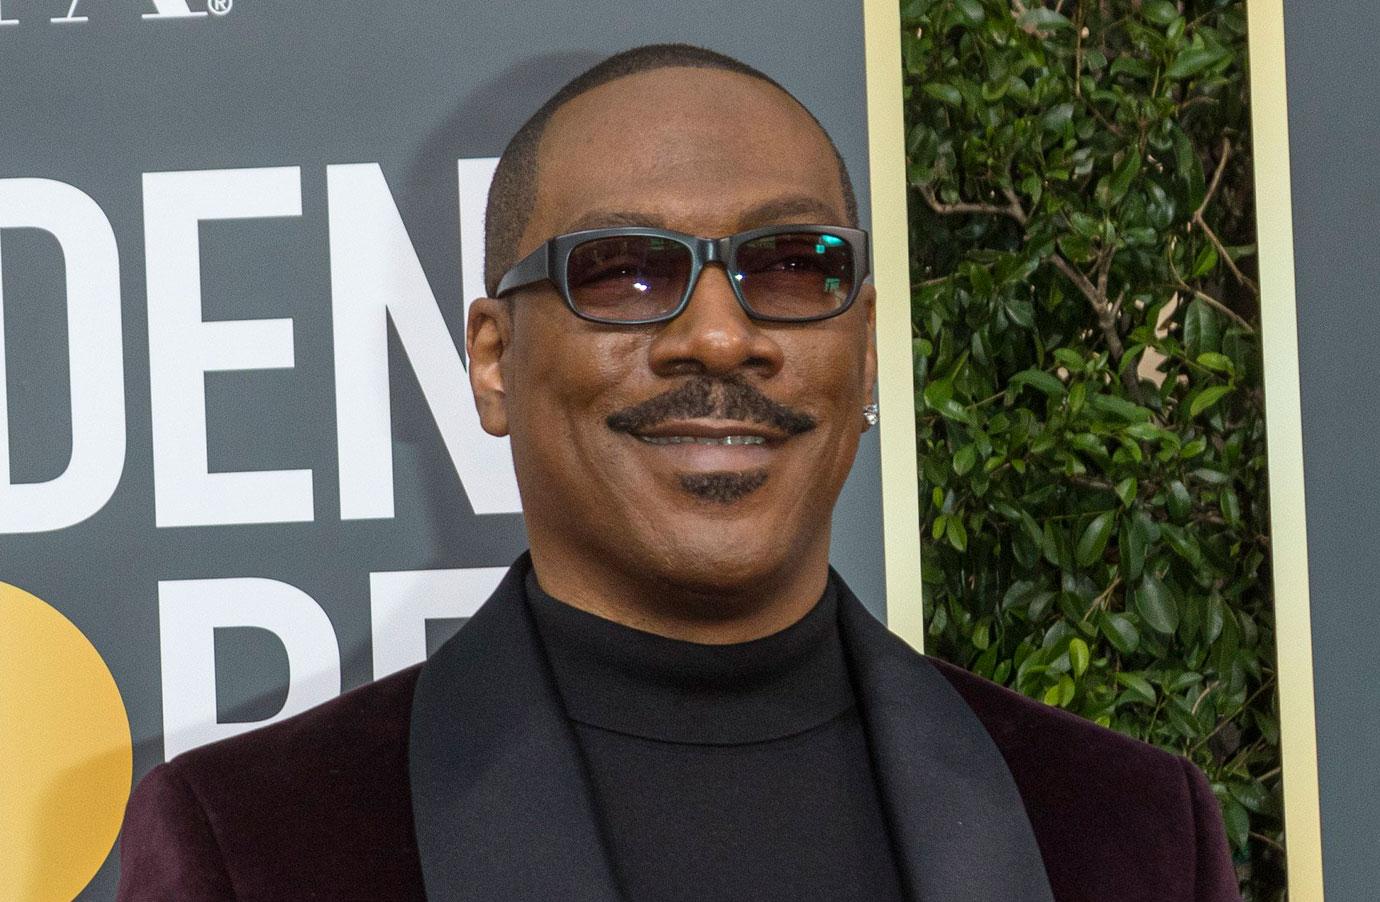 Eddie Murphy Celebs With Multiple Baby Mamas: Offset, Mick Jagger And More